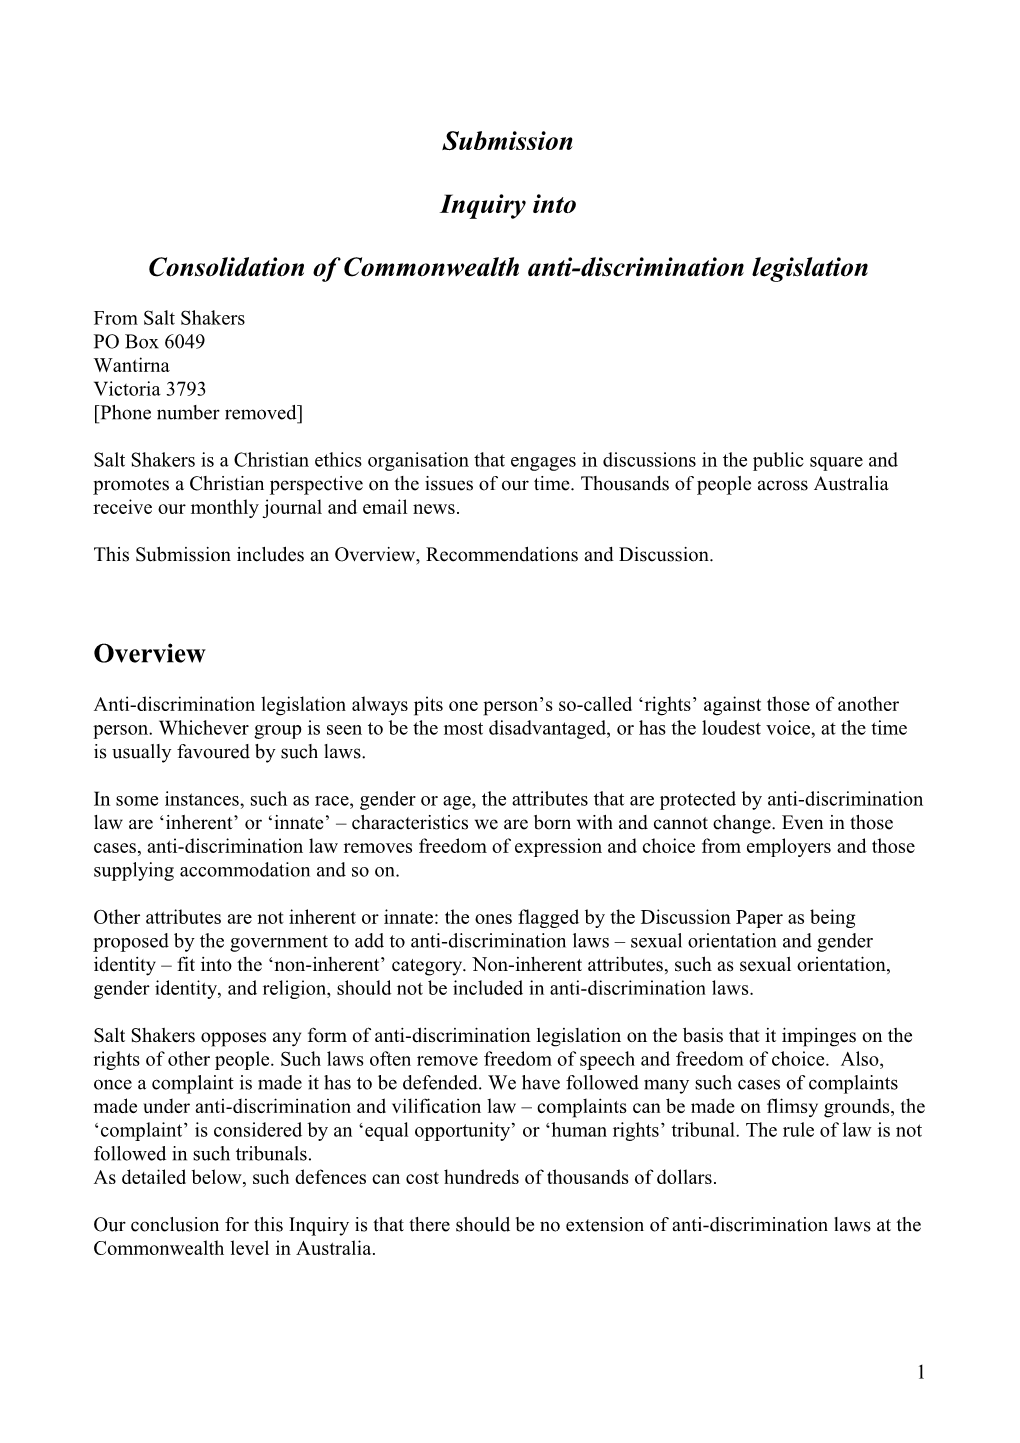 Submission on the Consolidation of Commonwealth Anti-Discrimination Laws - Salt Shakers